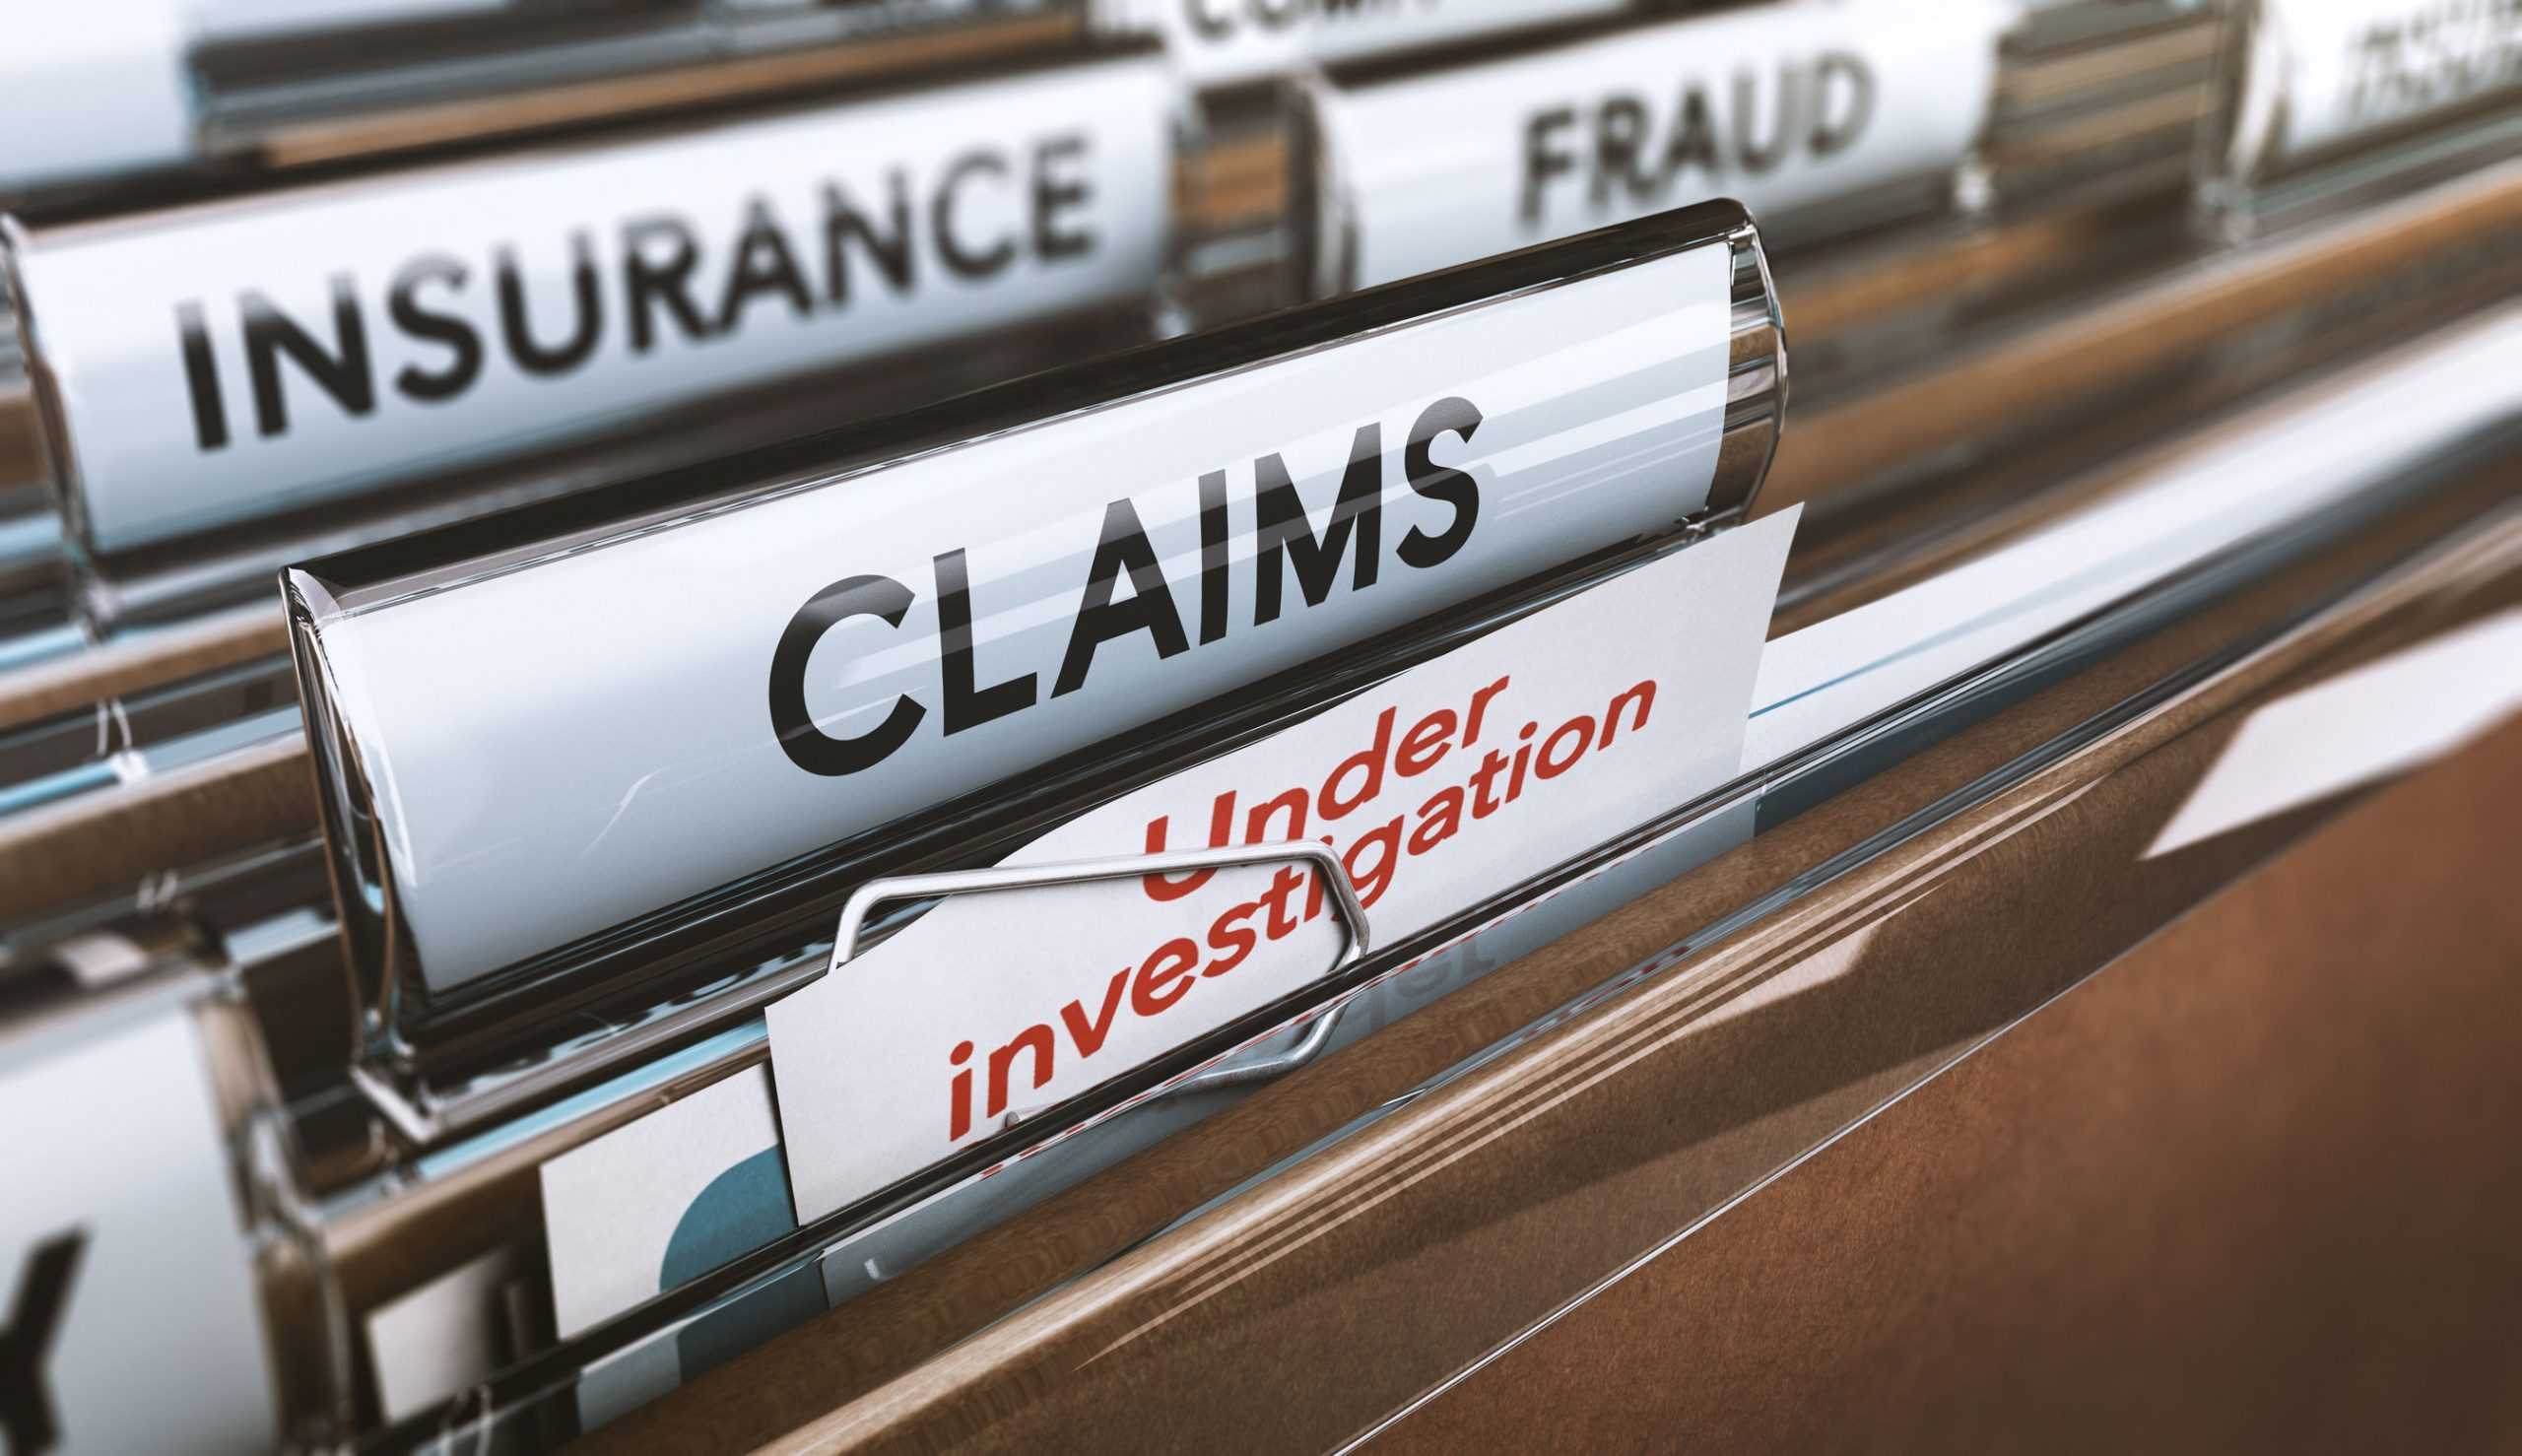 Billions lost in insurance sector: A sophisticated fraud?